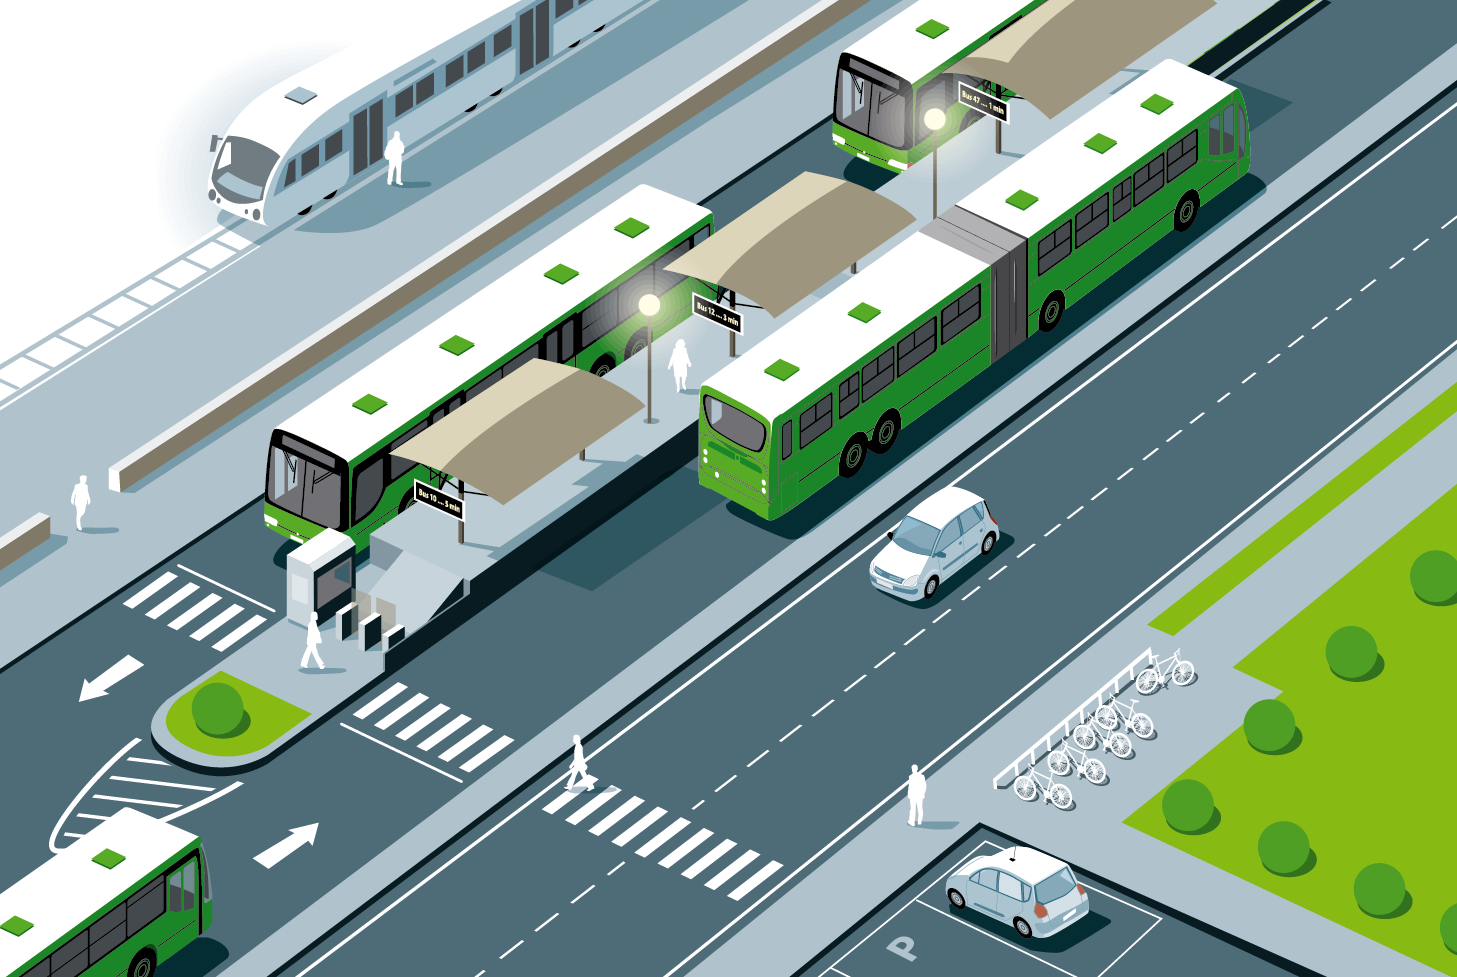 Why Our Cities Need Smart Transport - CITI I/O